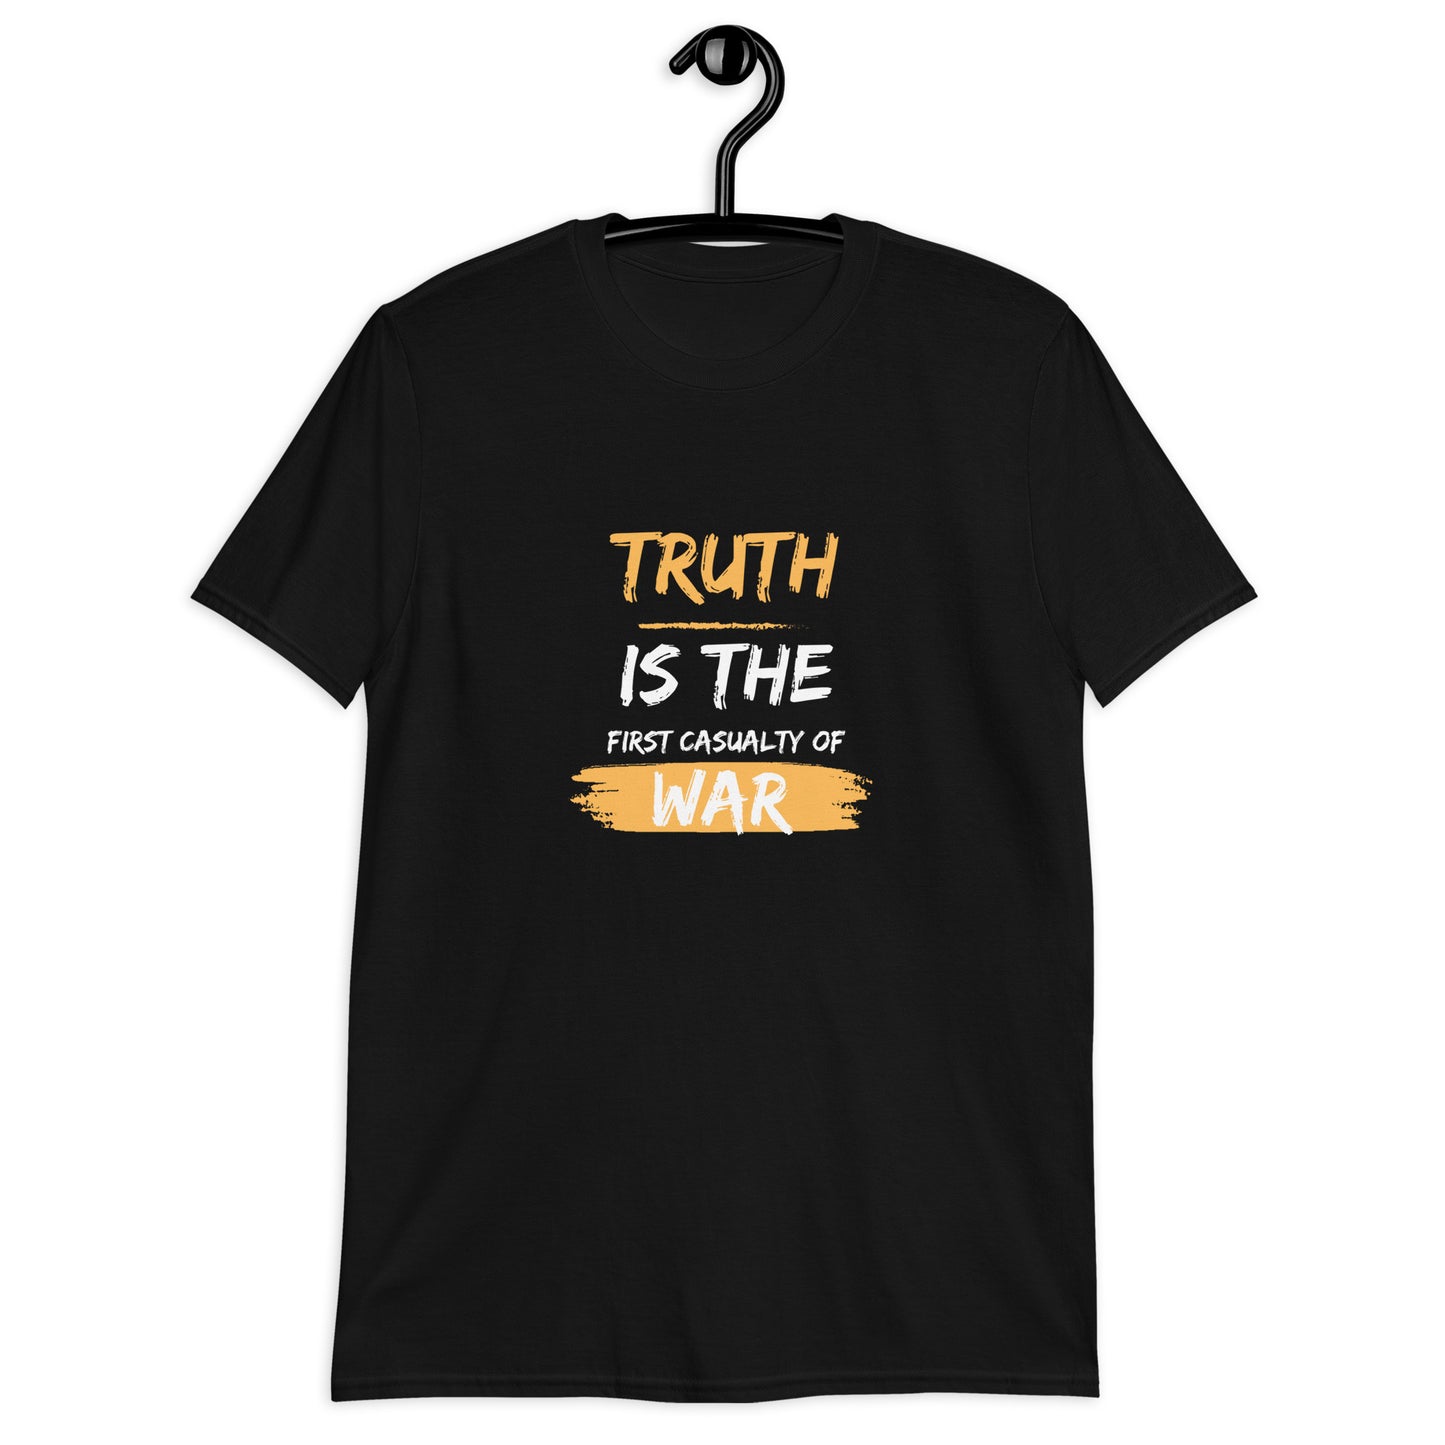 Challenging War Propaganda: Truth is the First Casualty of War T-Shirt